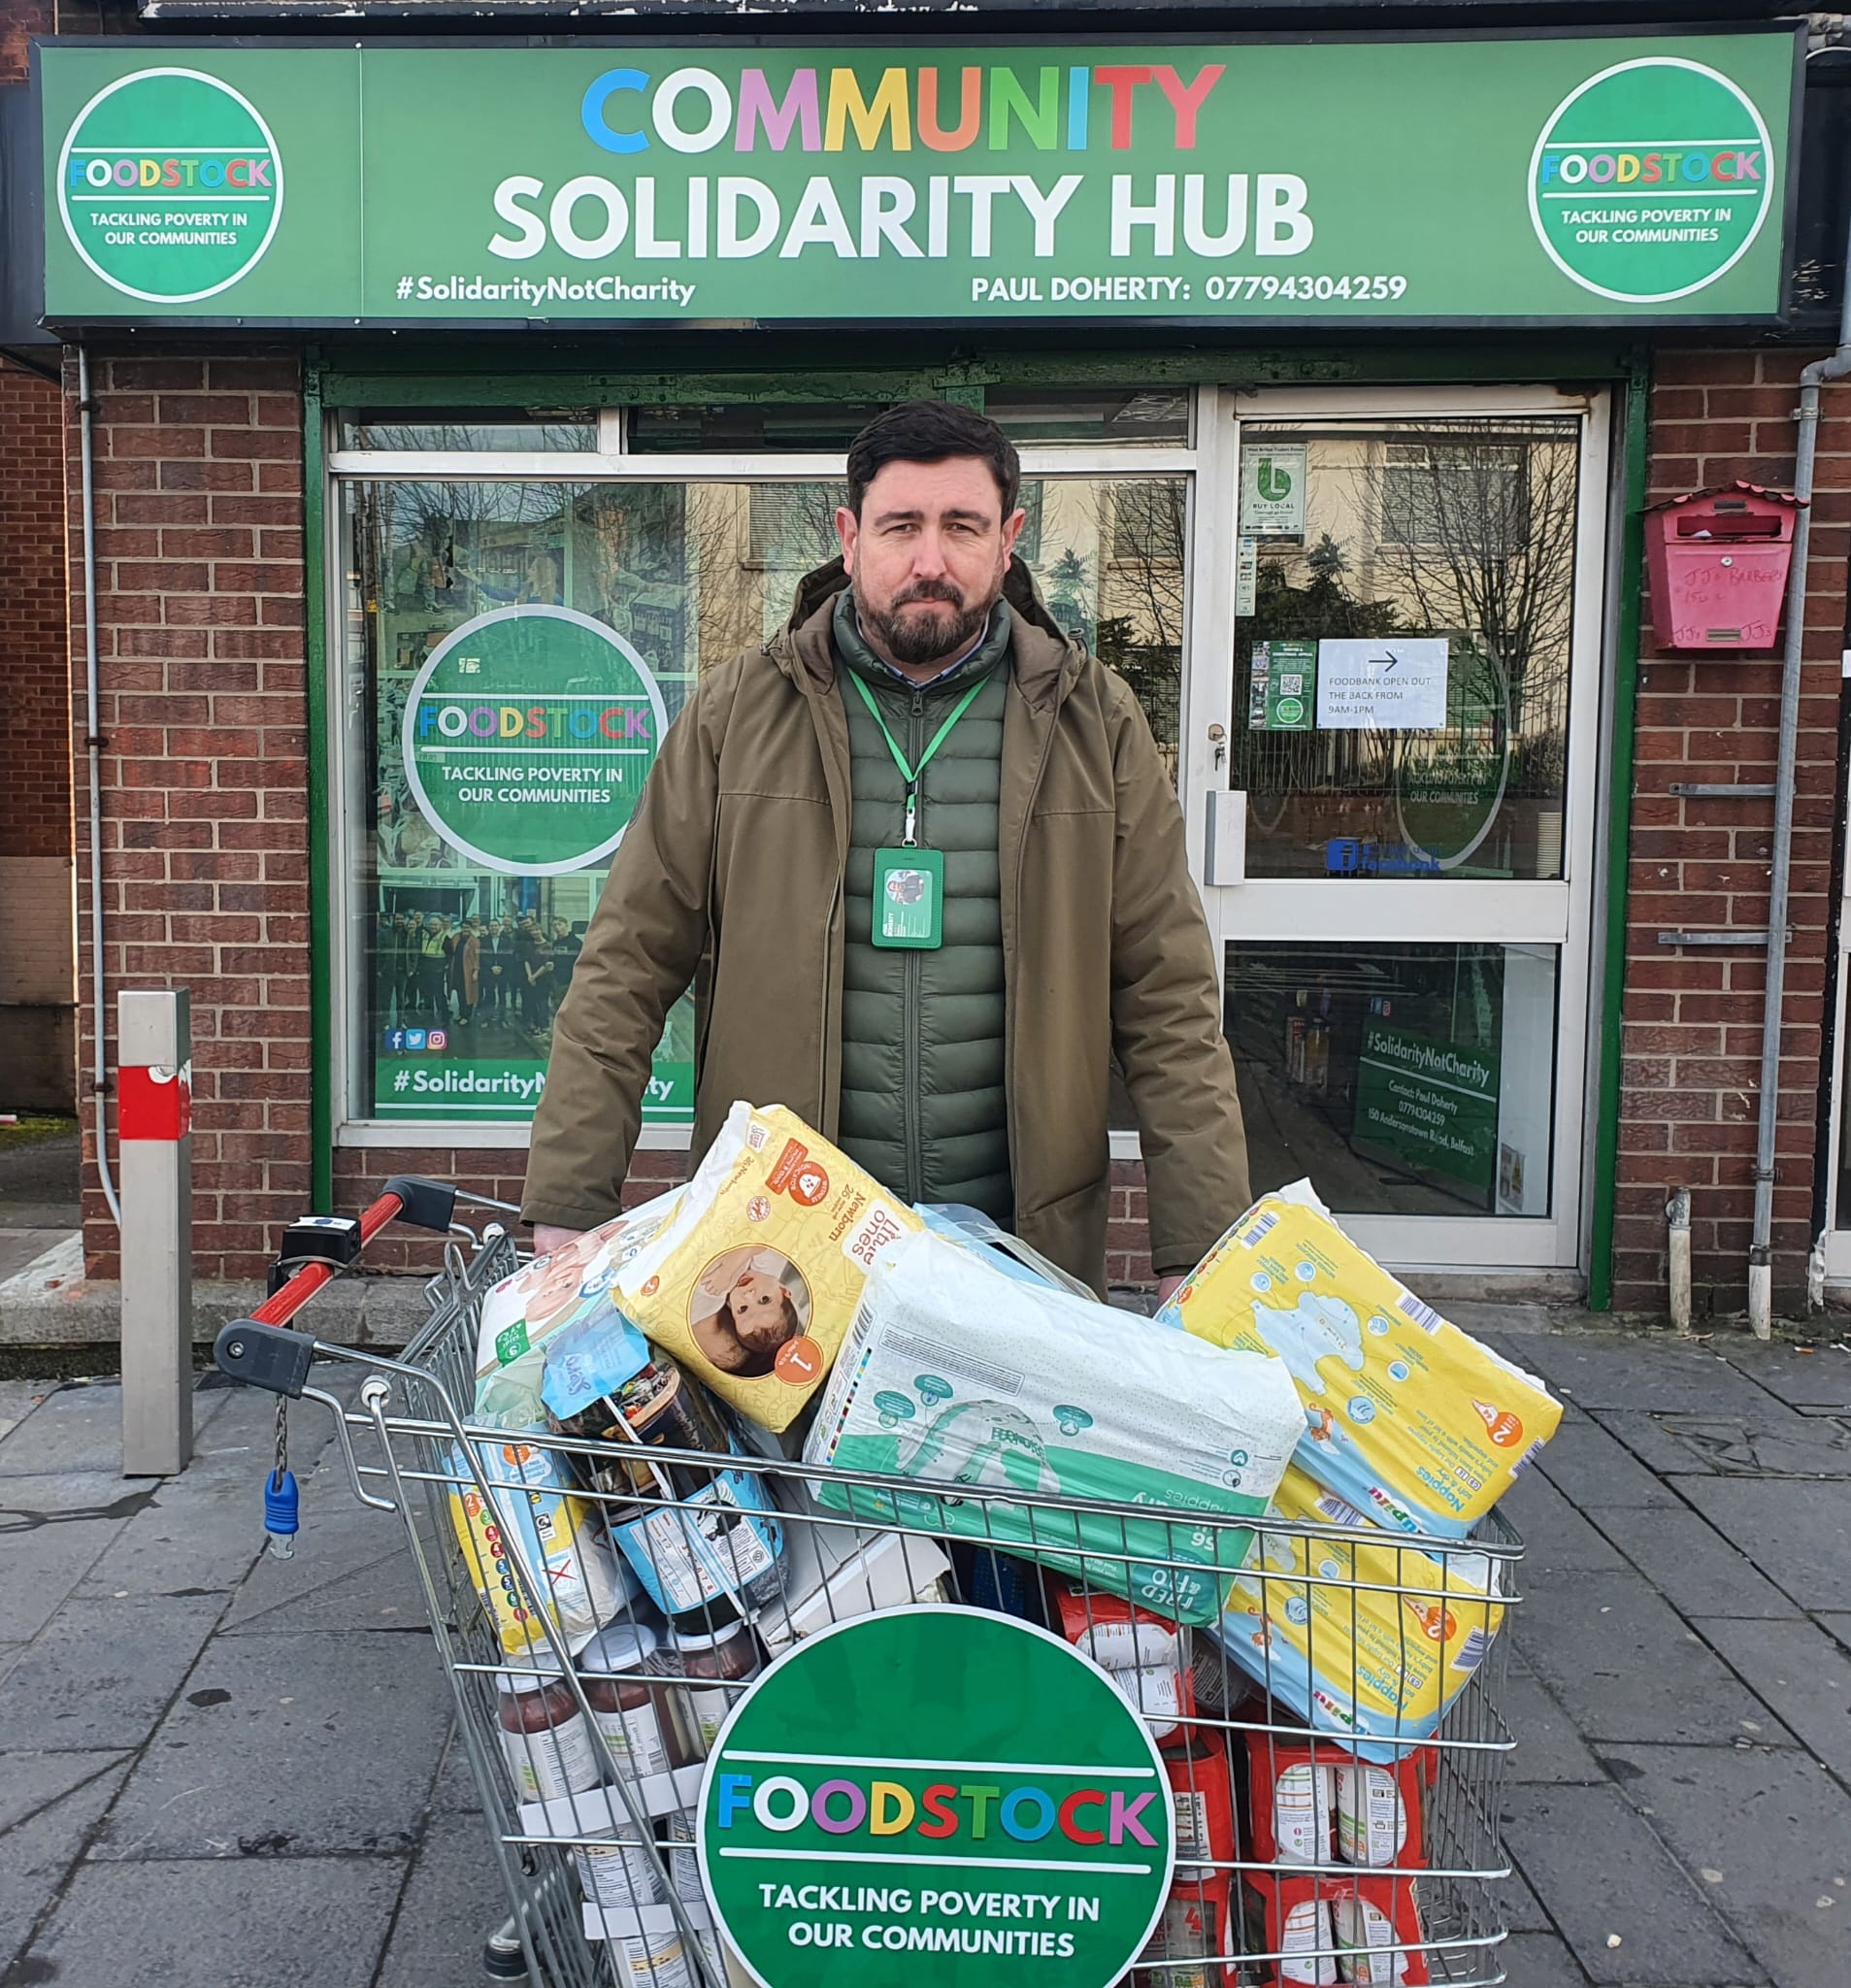 RIGHT TO FOOD: SDLP Councillor Paul Doherty outside Foodstock